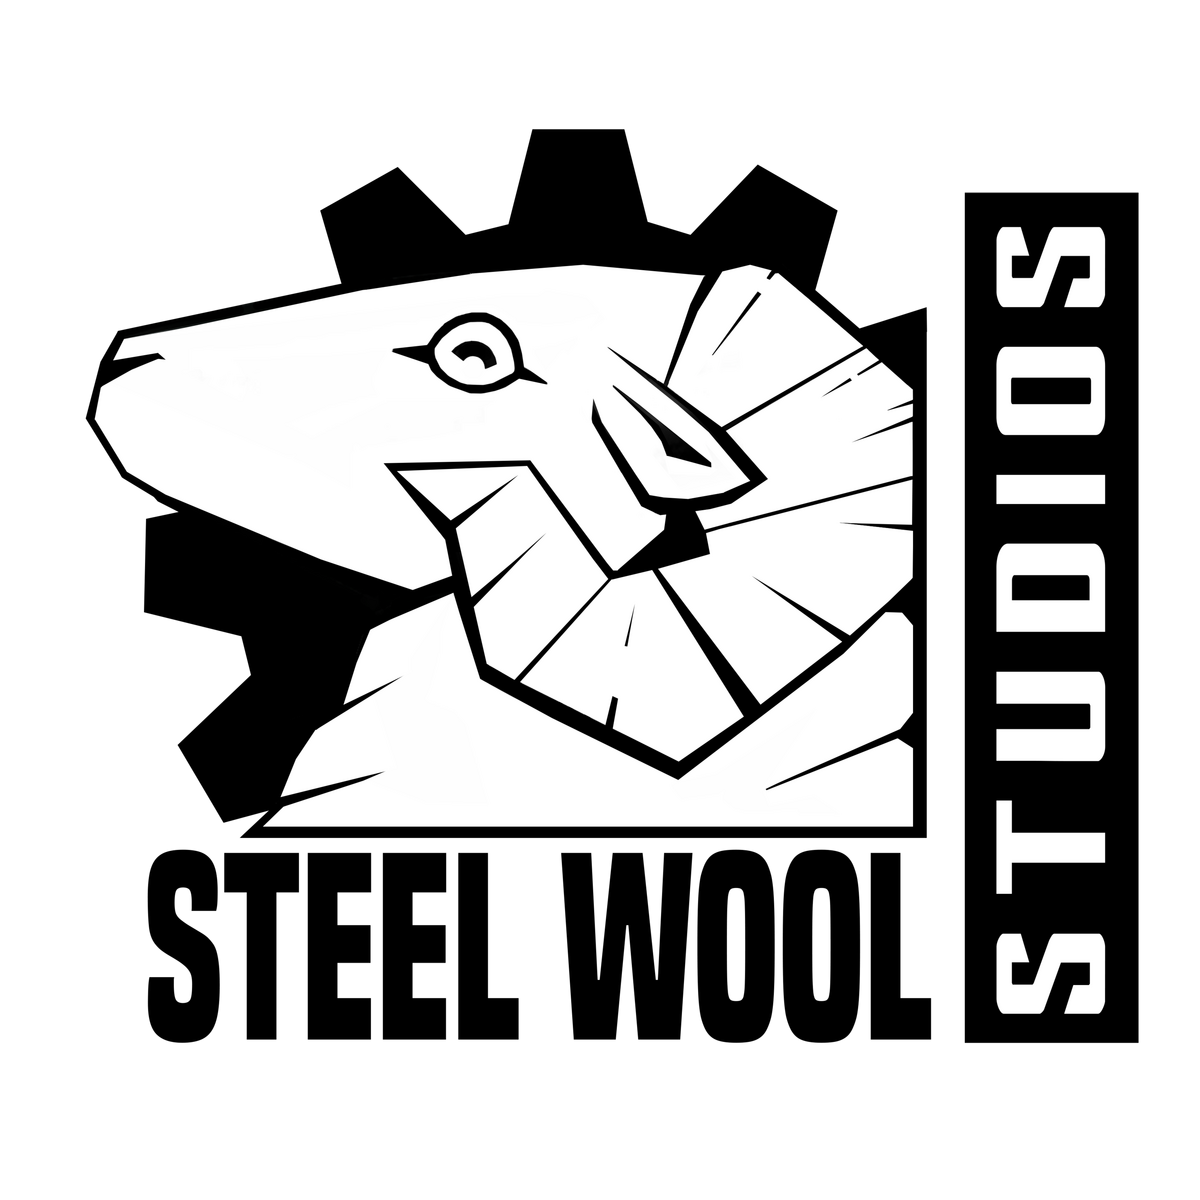 Steel Wool Studios - We're hiring! Come help us make amazing games! Check  out the listings here